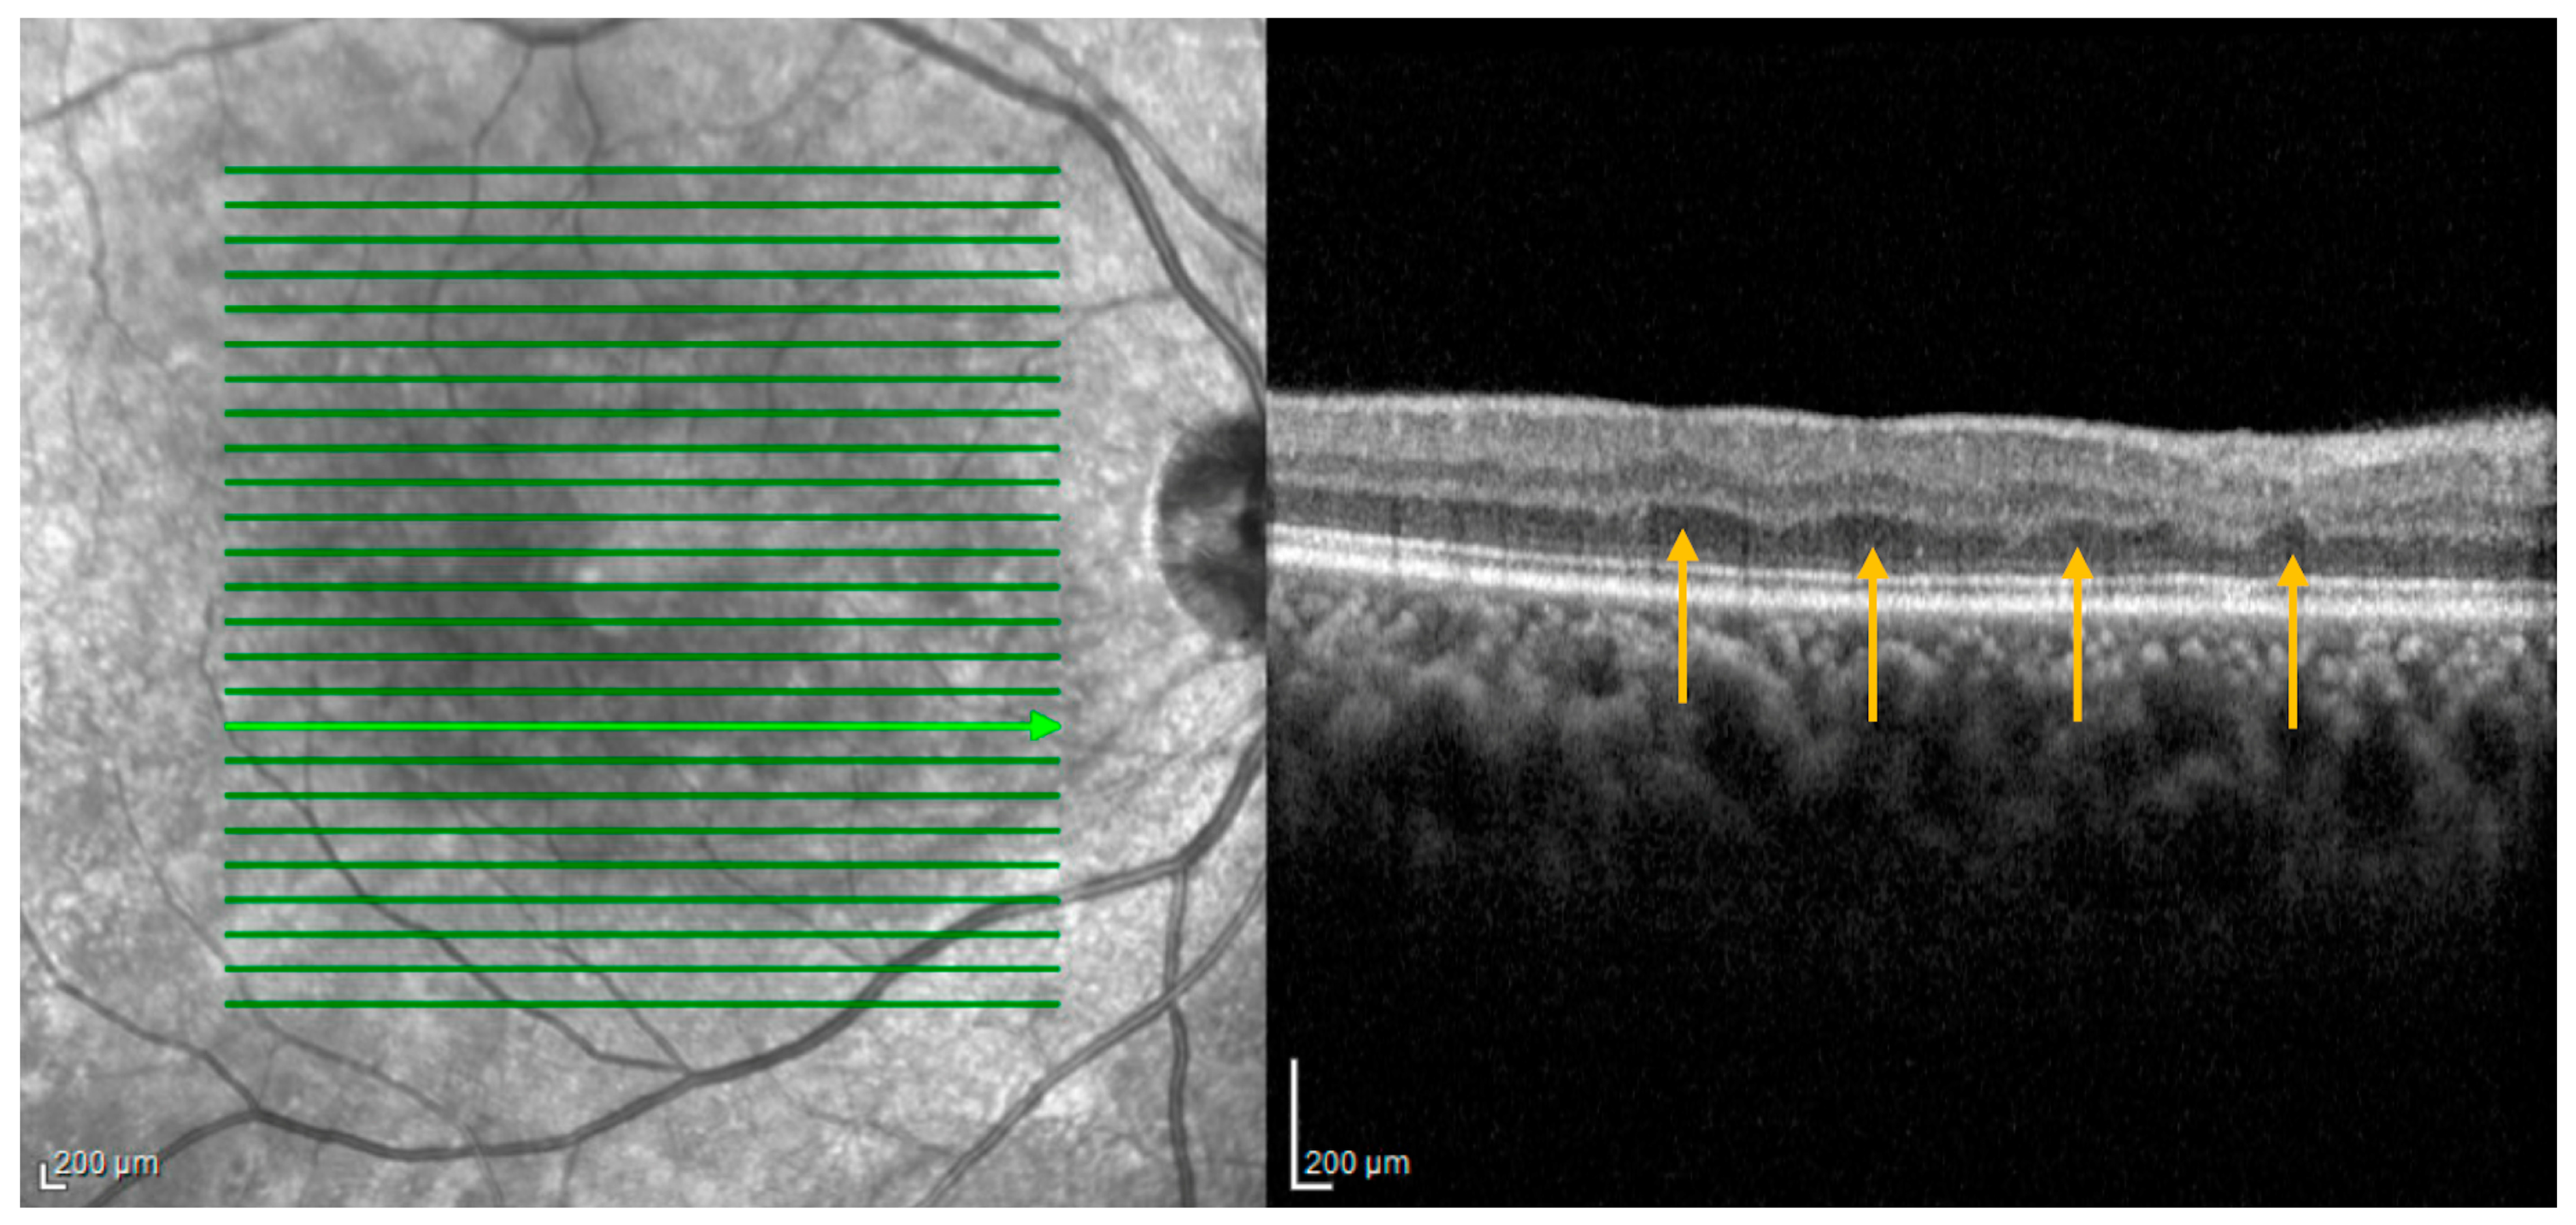 RIPLs are thought to arise at the sites of previous middle retinal layer infarcts, potentially evolving as a subsequent manifestation of paracentral middle maculopathy, wherein the hyperreflective inner nuclear band observed during the acute phase gradually undergoes atrophy over time.